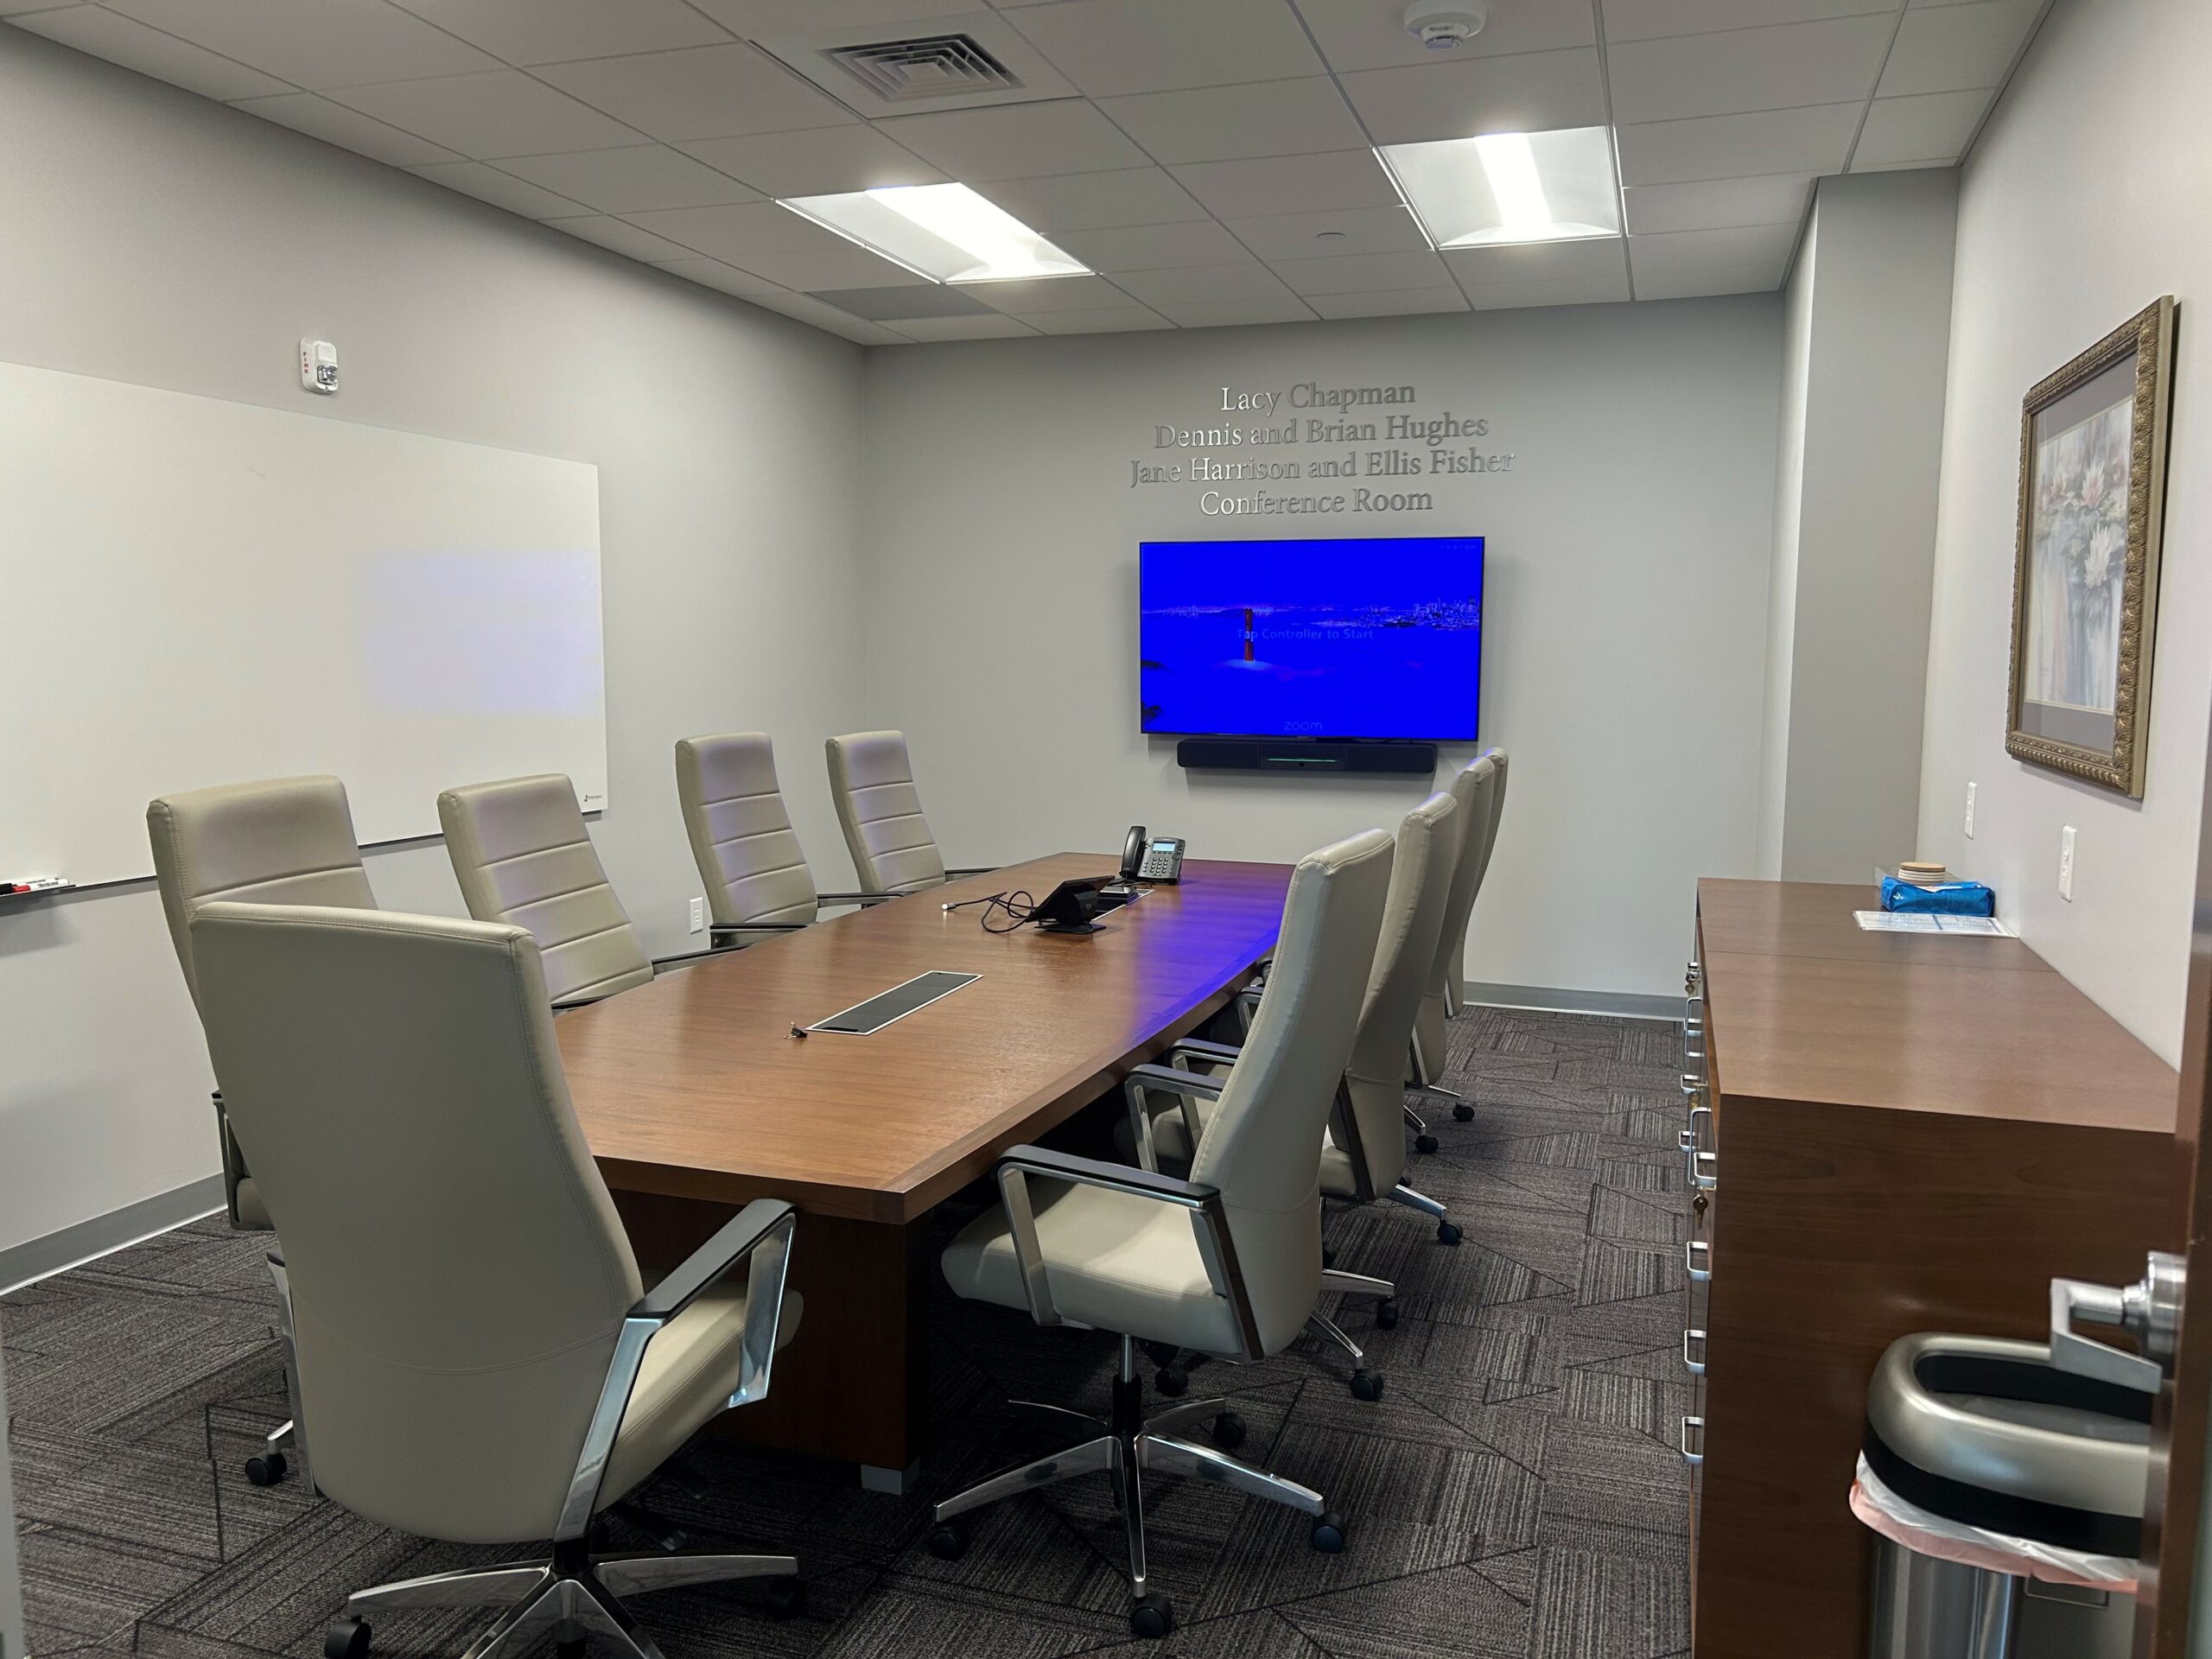 Conference room with table and chairs, white board and one wall mounted monitor